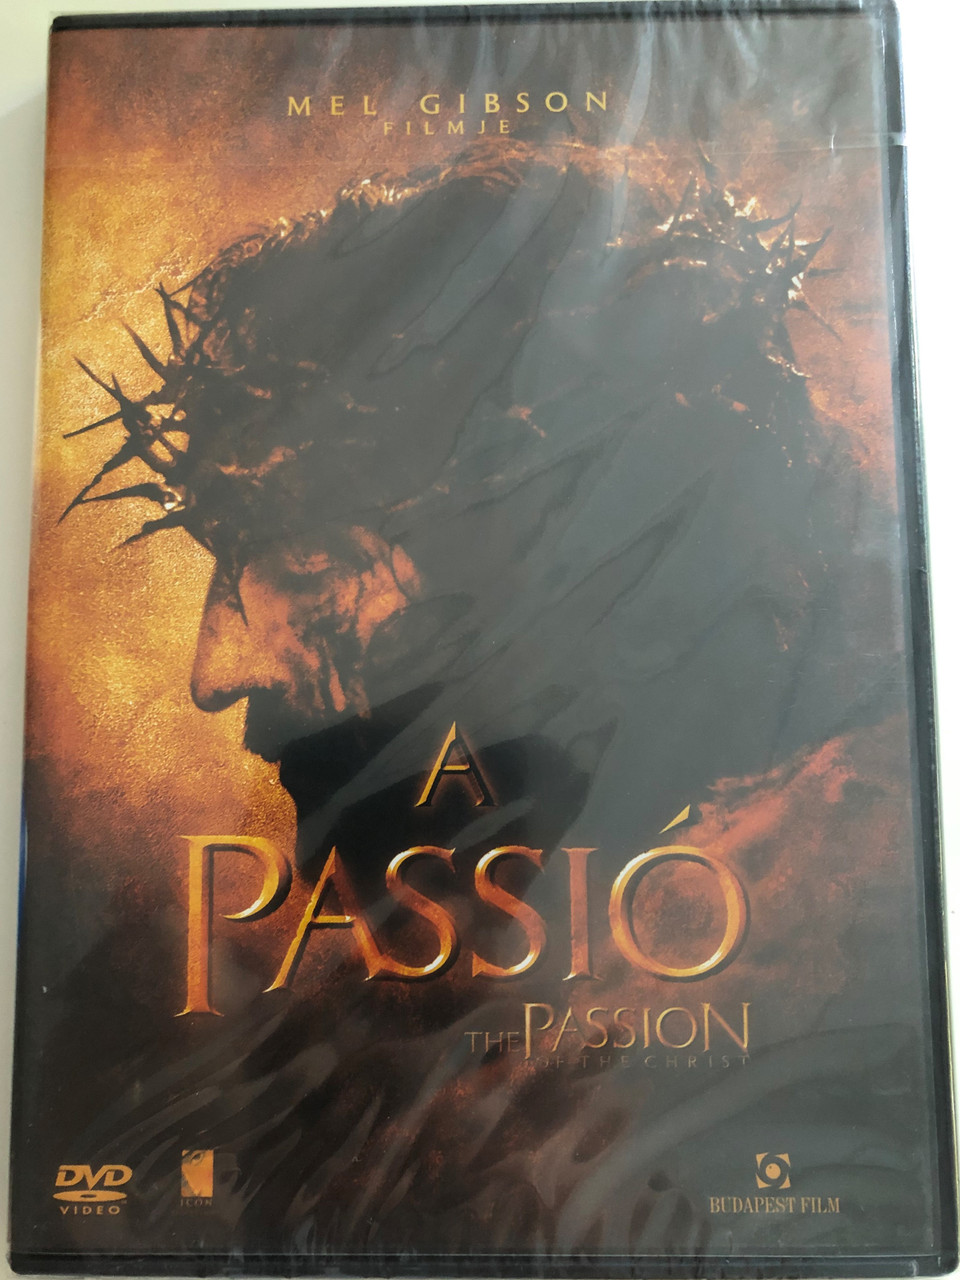 The Passion of the Christ DVD A Passió / Mel Gibson filmje / Directed by  Mel Gibson / Starring: Jim Caviezel, Monica Bellucci, Maia Morgenstern,  Sergio Rubini - bibleinmylanguage